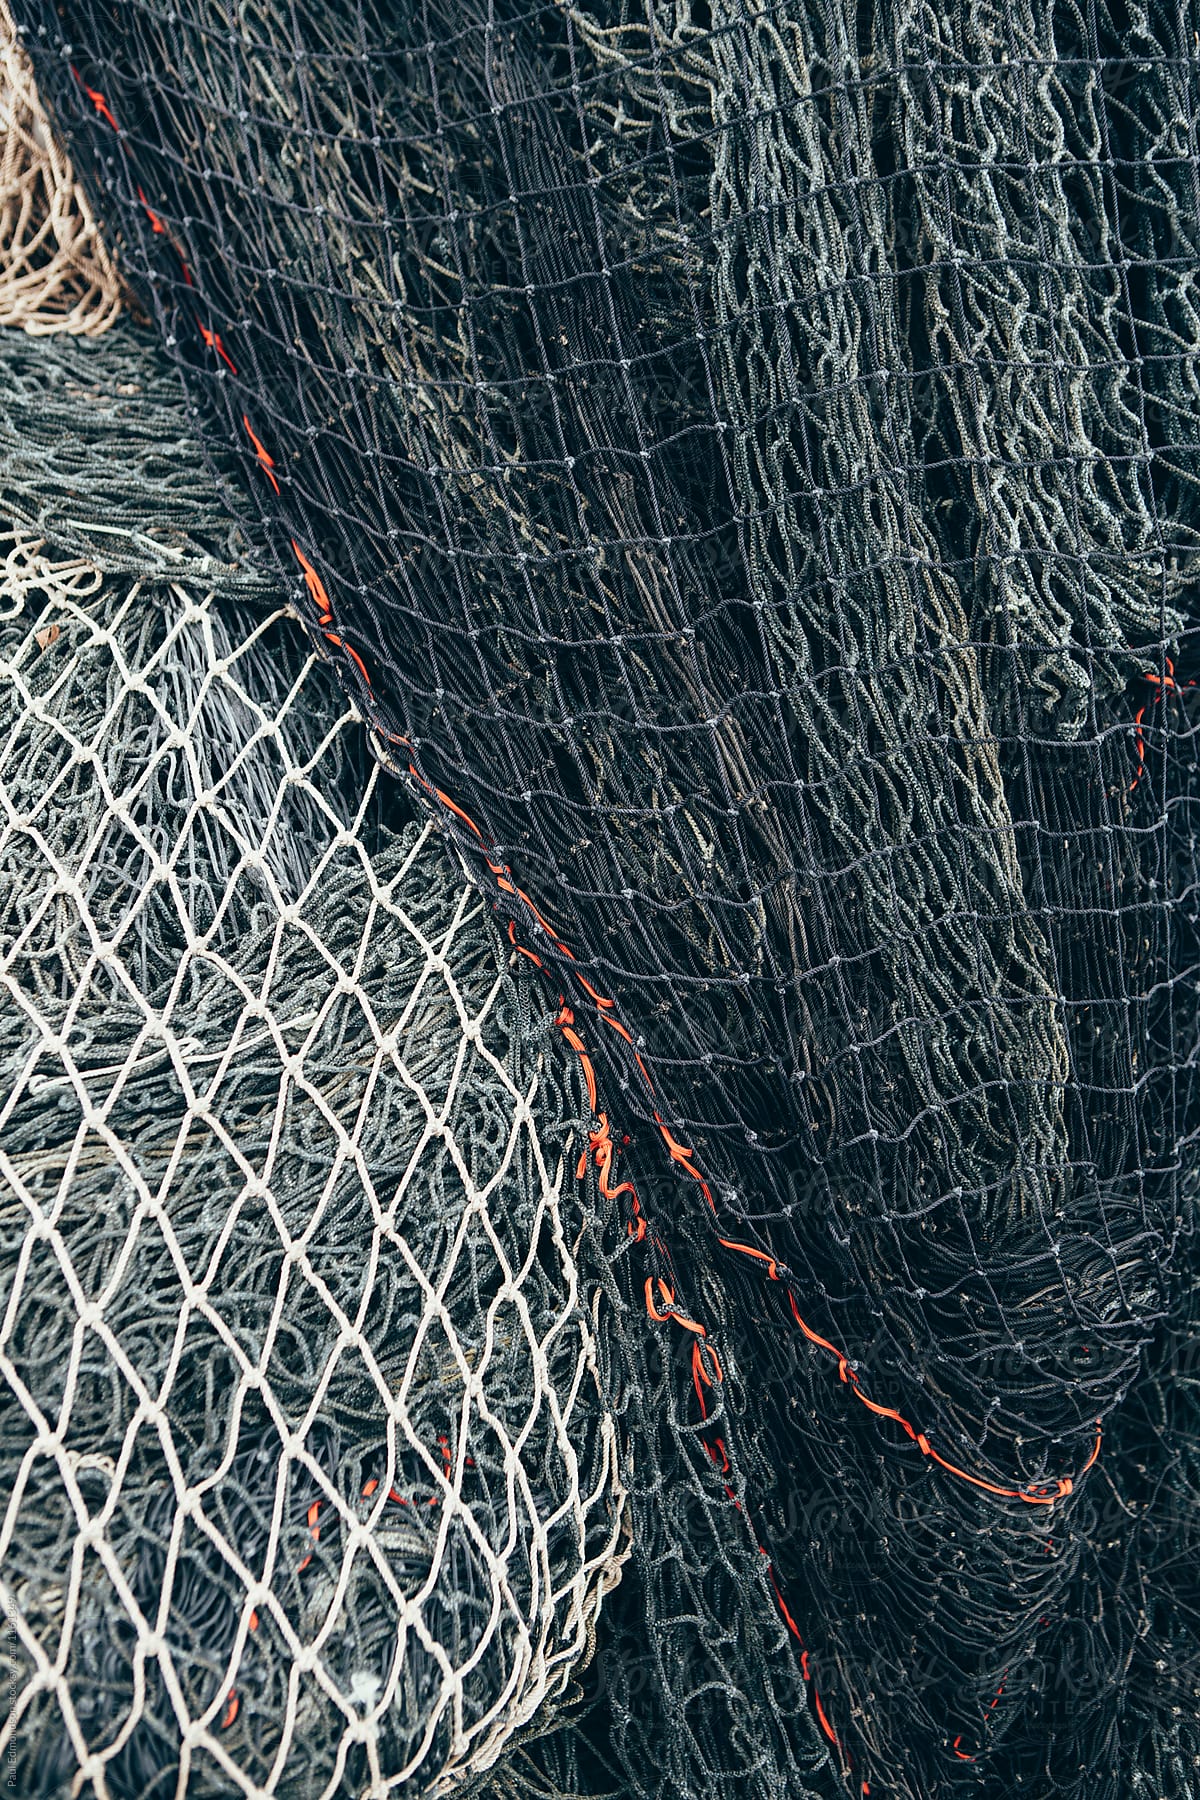 Blue Tarpaulin Covering Pile Of Commercial Fishing Nets by Stocksy  Contributor Rialto Images - Stocksy